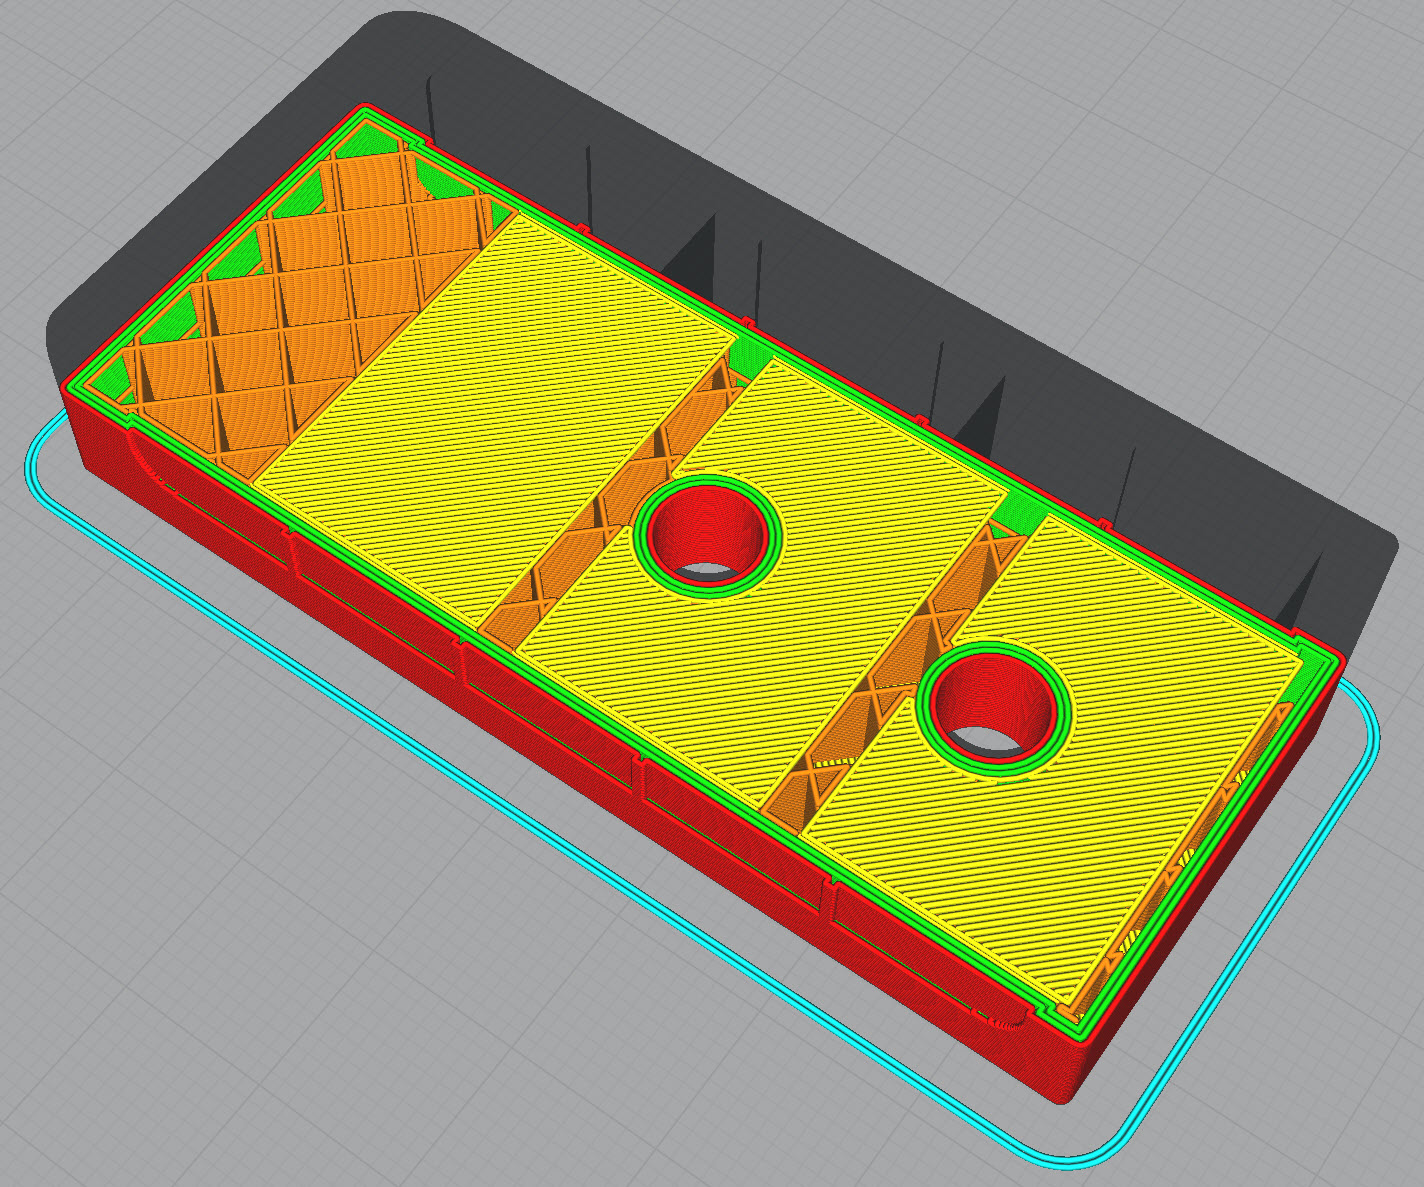 Bulging / round corners – Others (Archive) – Prusa3D Forum